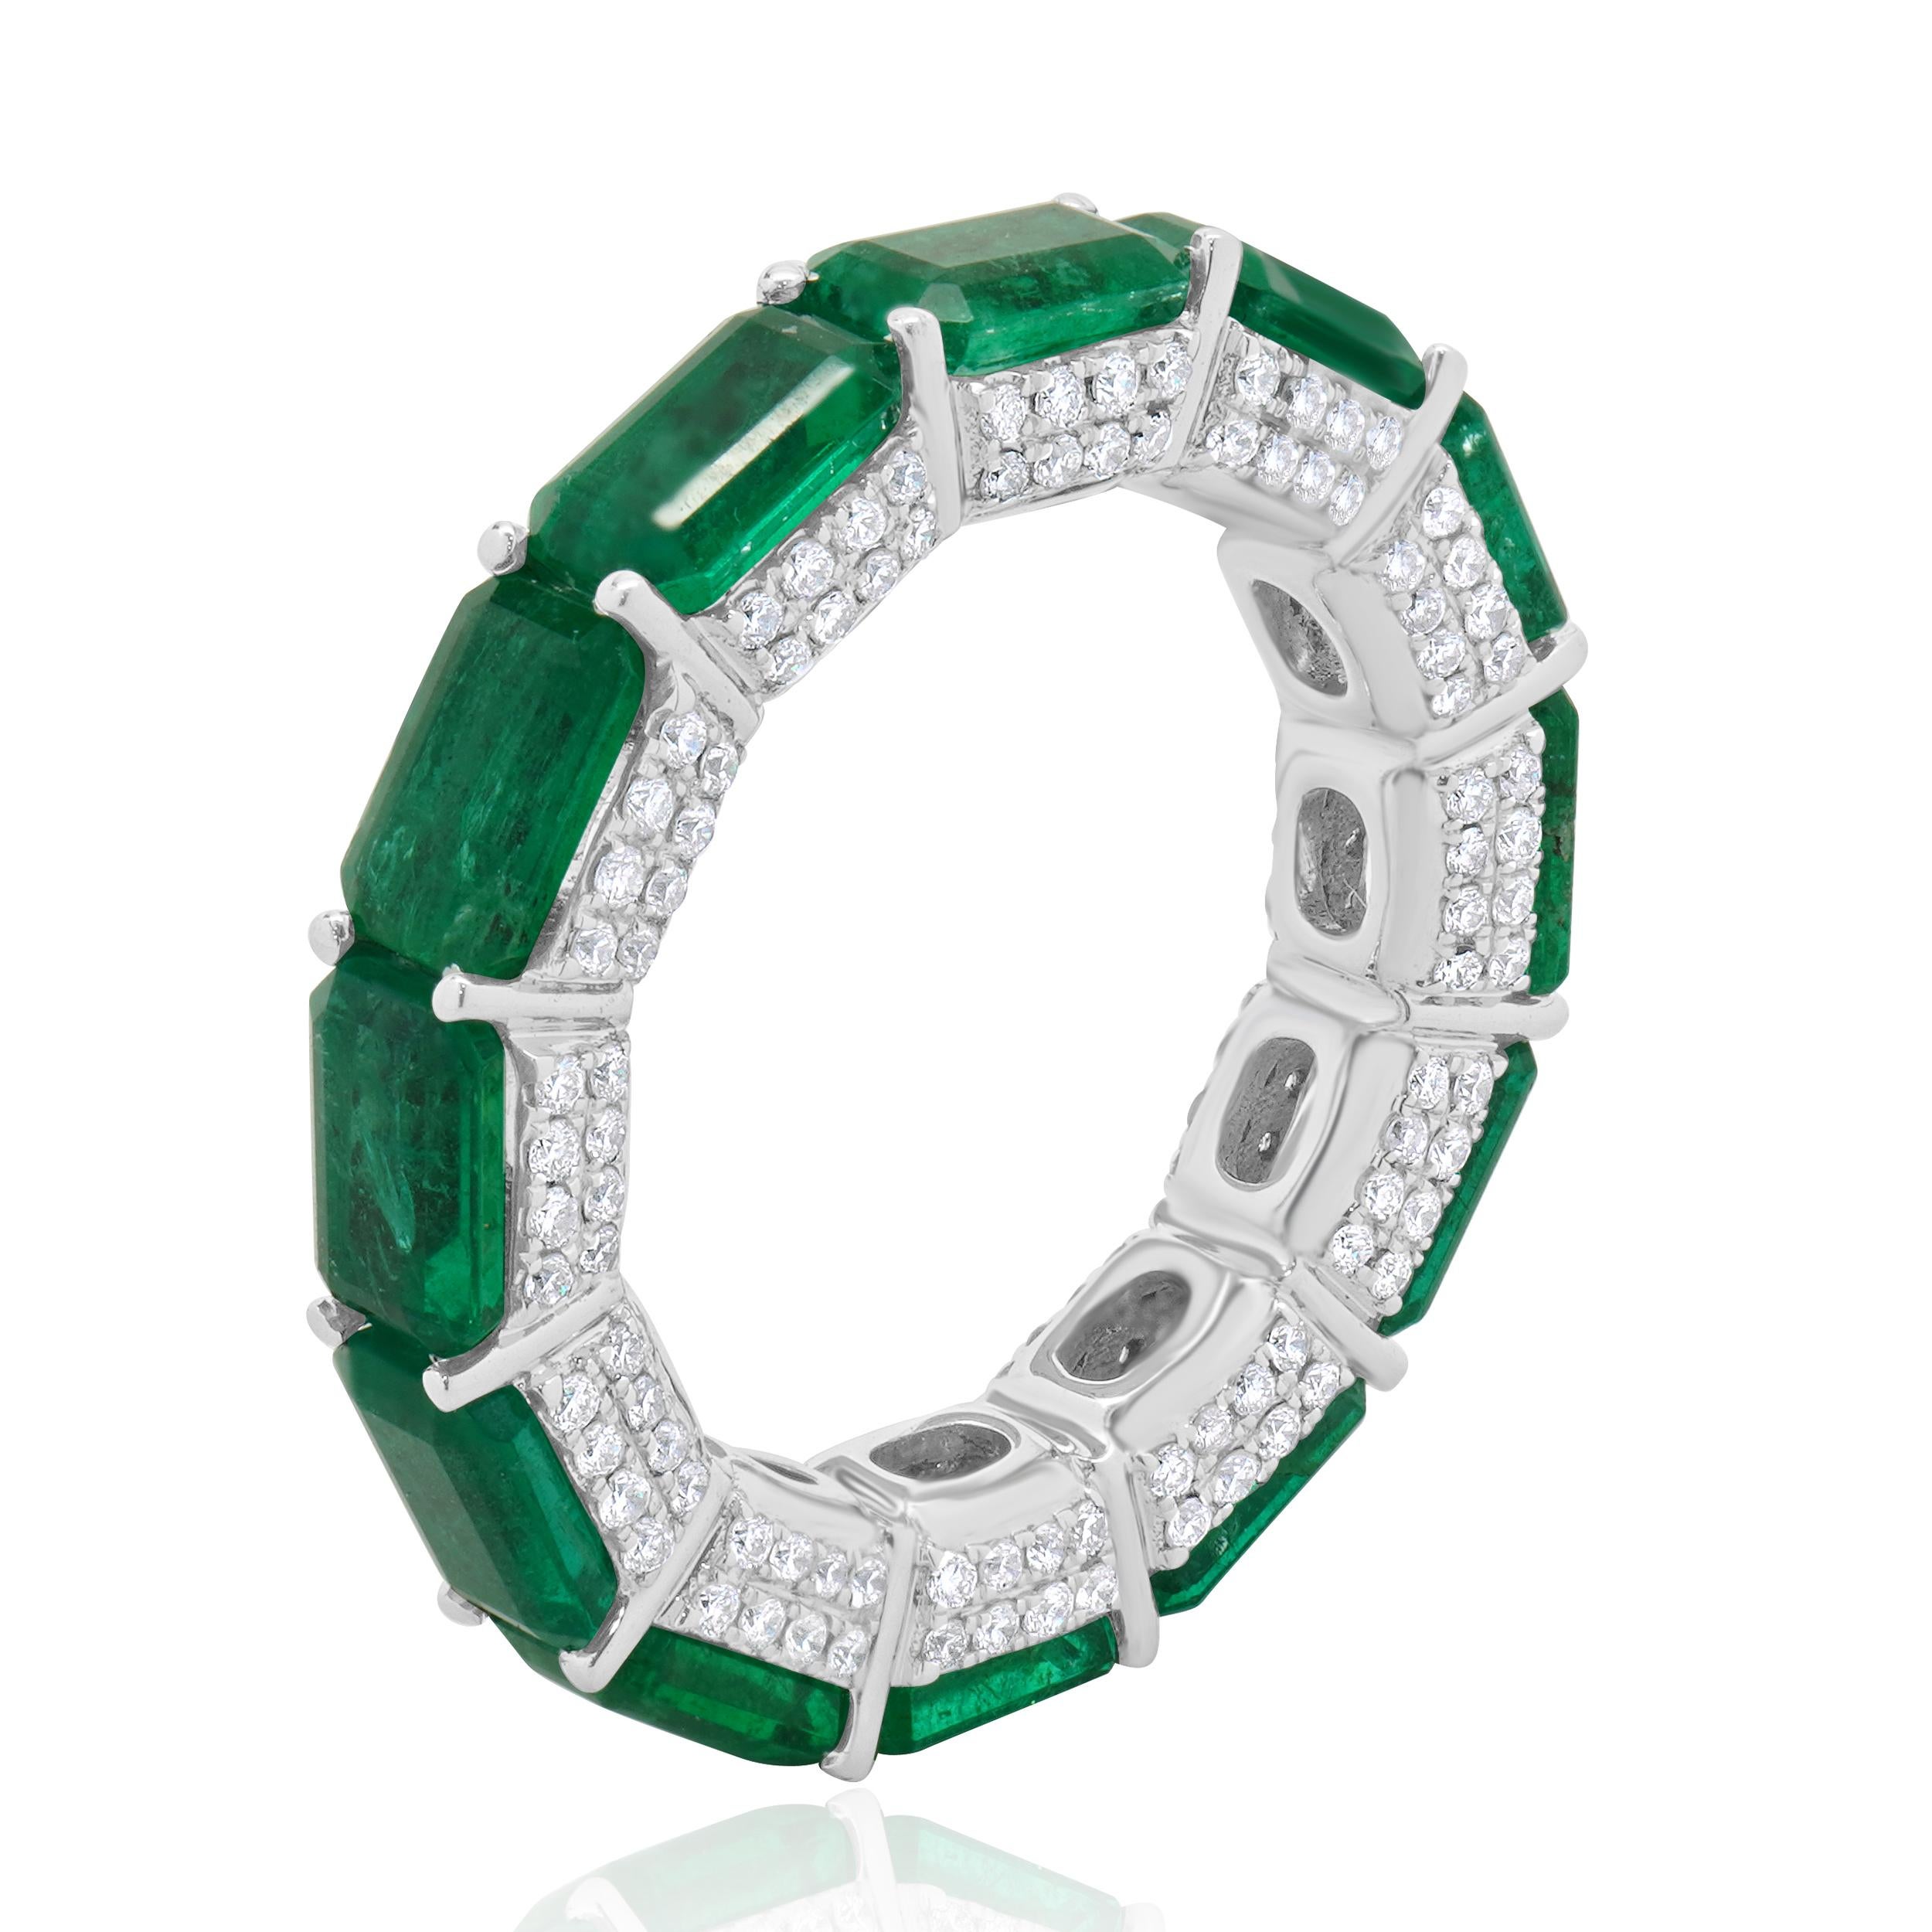 Designer: custom
Material: 14K white gold
Diamond:  round brilliant cut = 0.81cttw
Color: G
Clarity: VS
Emeralds: 6.49cttw
Ring Size: 6.5 (please allow two extra shipping days for sizing requests) 
Weight: 5.56 grams
